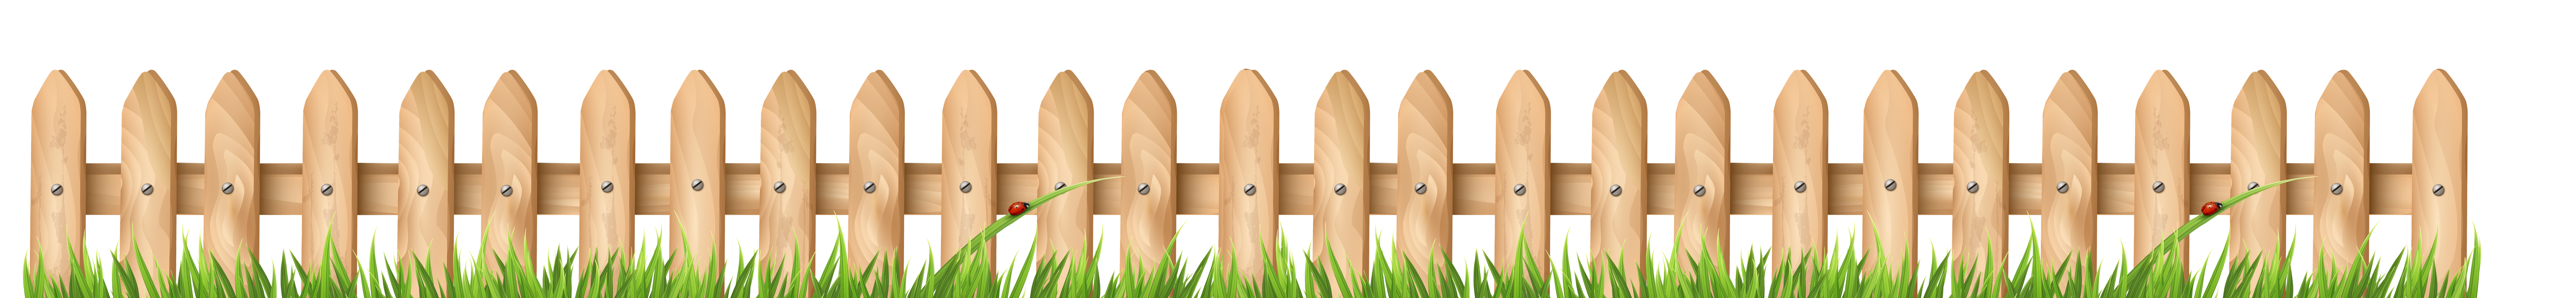 Fencing clipart wood fence. Download free png transparent